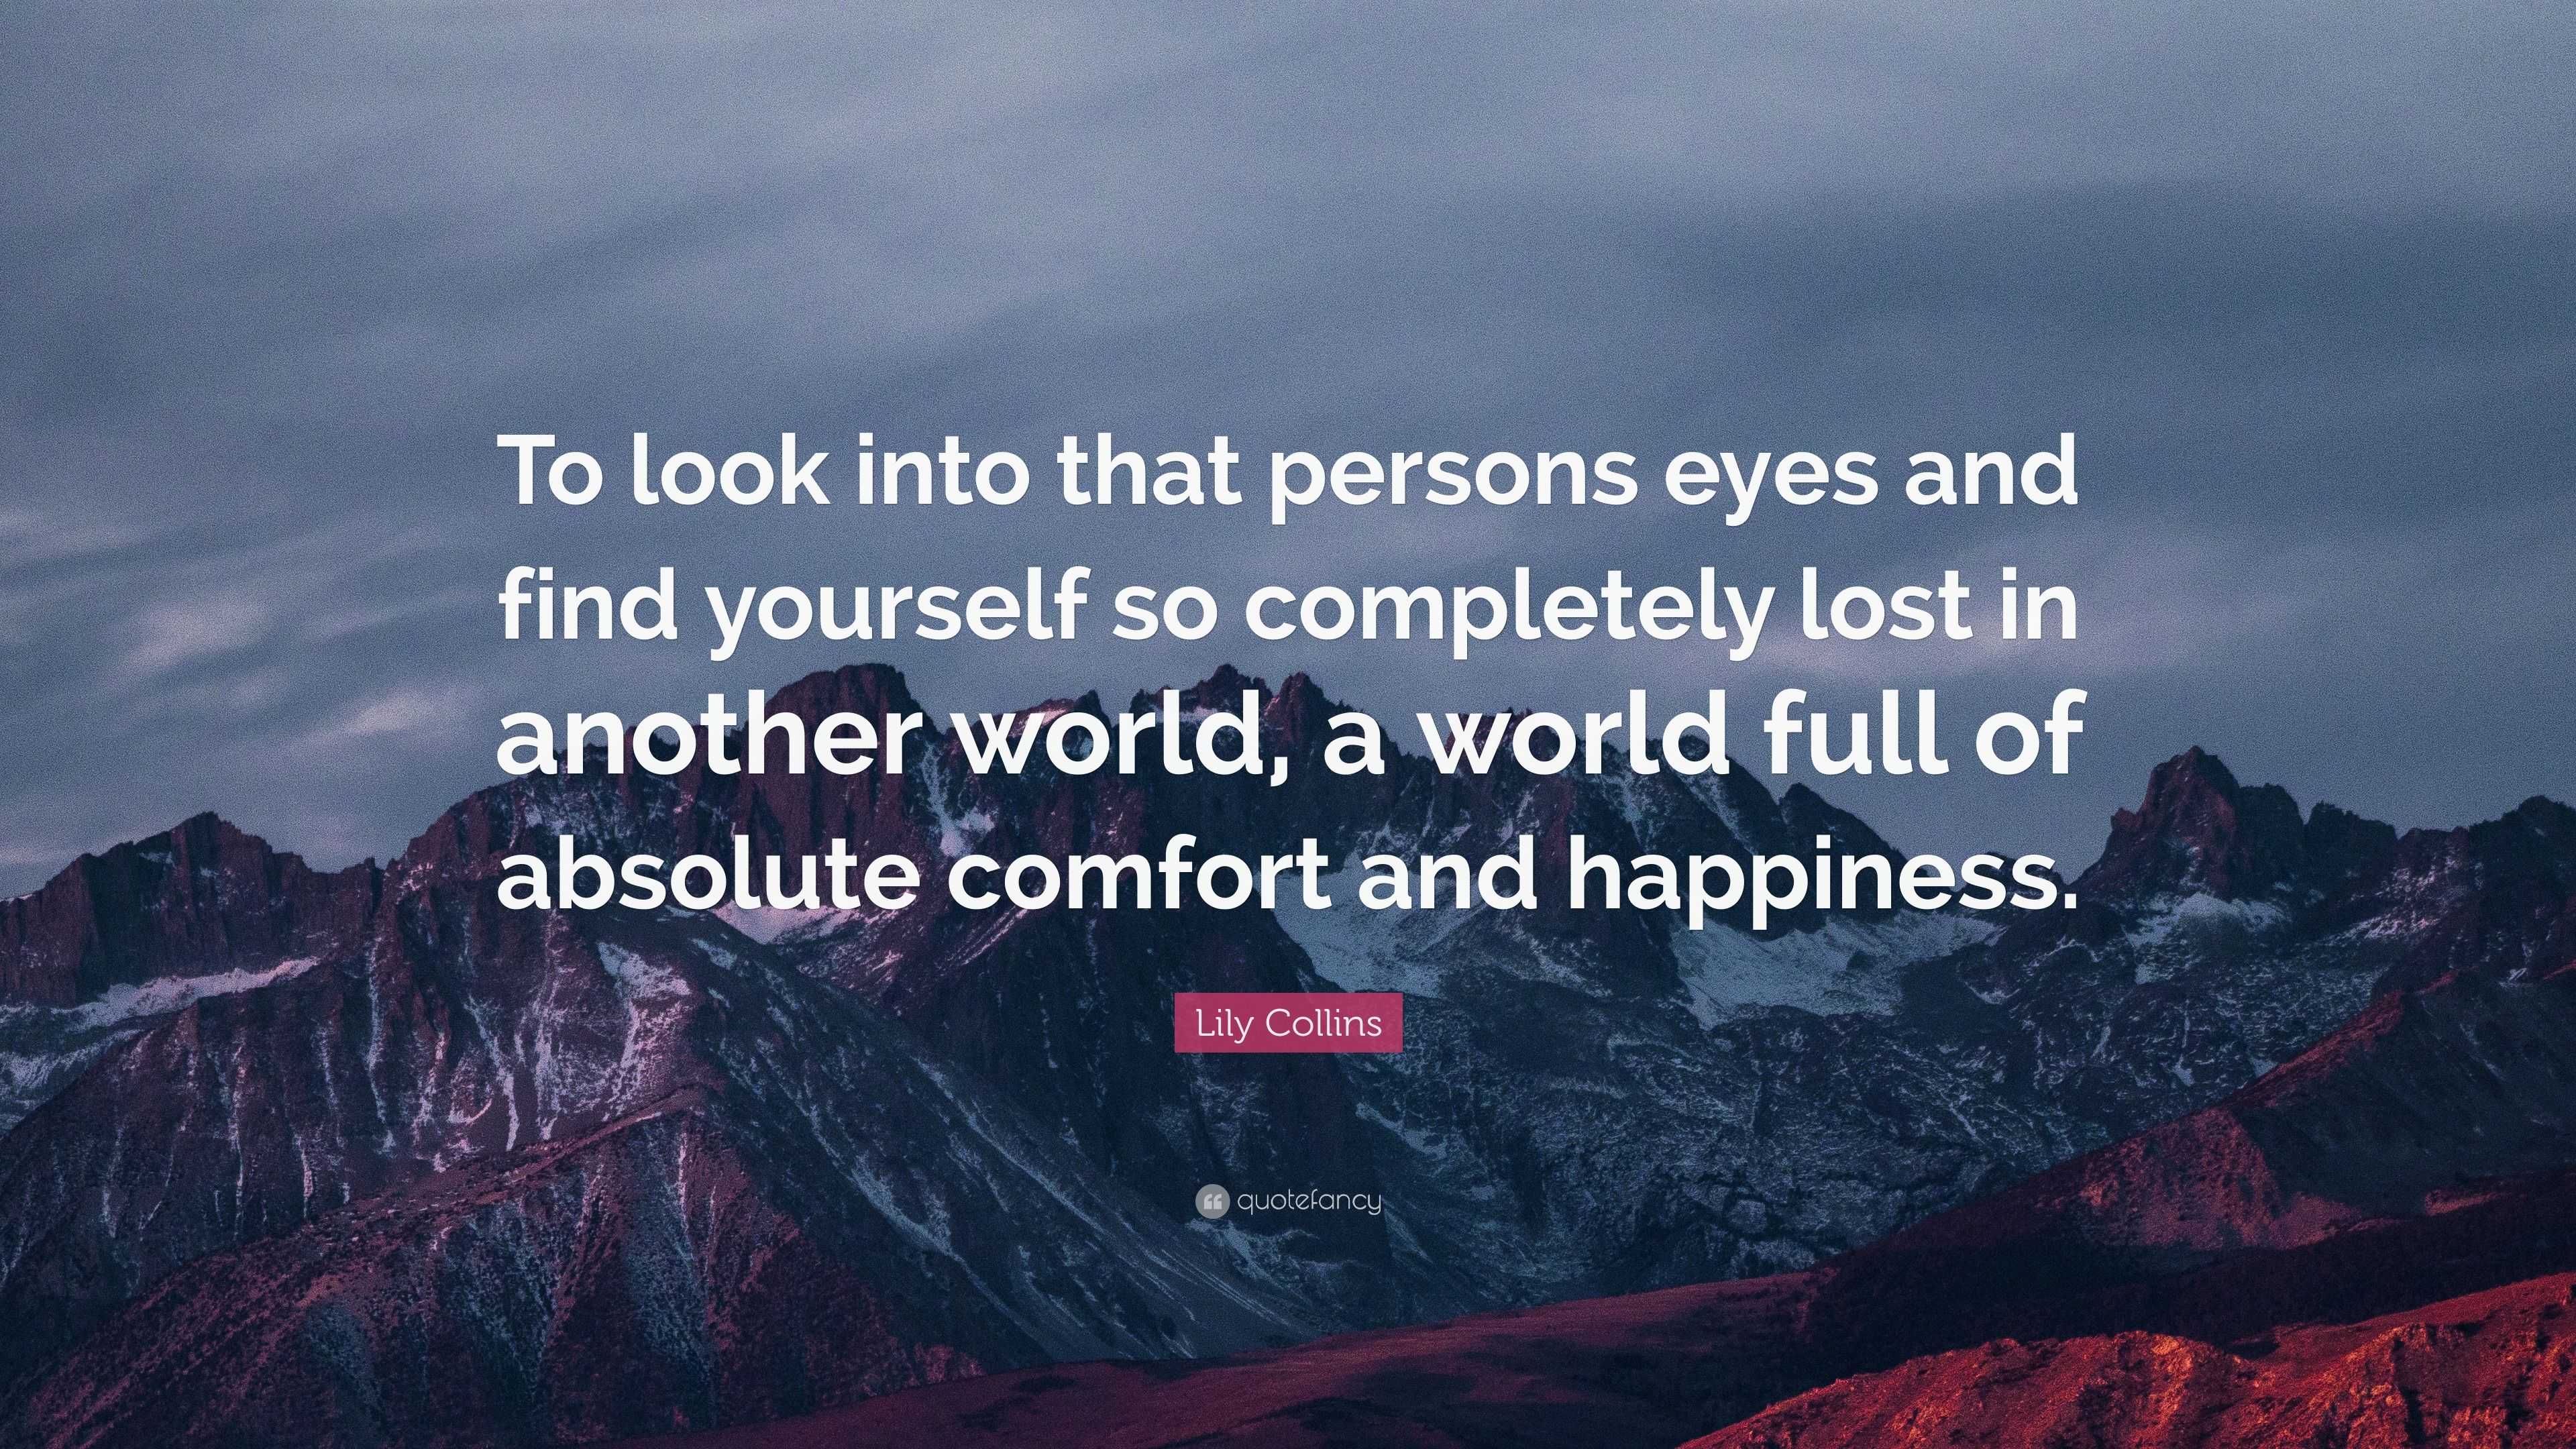 Lily Collins Quote: “To look into that persons eyes and find yourself ...